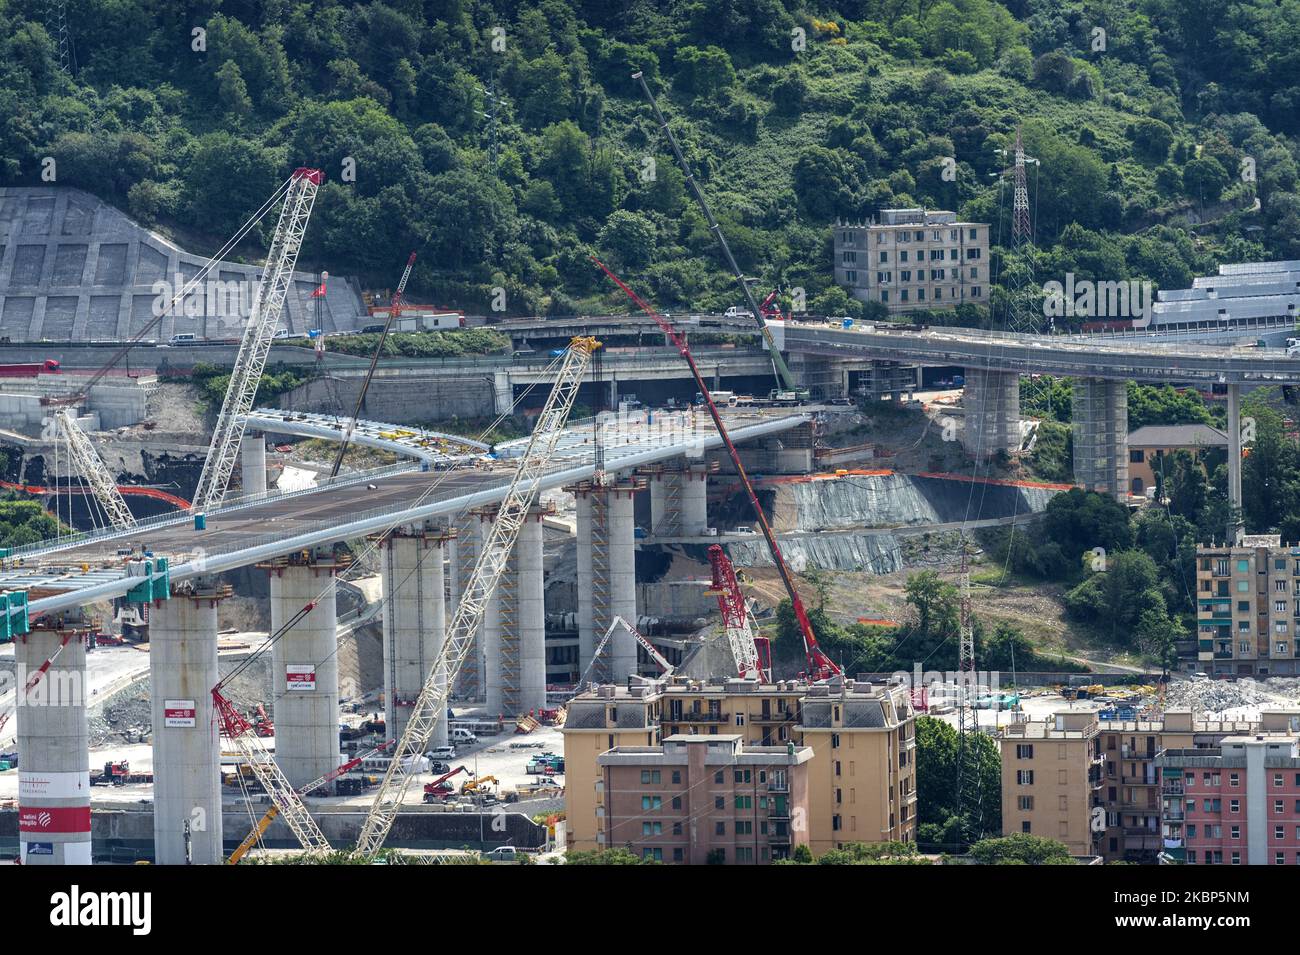 View of the new viaduct that will connect Genoa again from east to west on May 22, 2020 in Genoa, Italy. The new bridge will consist of a steel deck, with a continuous girder of a total length of 1067 meters consisting of 19 spans. The last span of the bridge designed by architect Renzo Piano has just been fixed. (Photo by Fabrizio Di Nucci/NurPhoto) Stock Photo